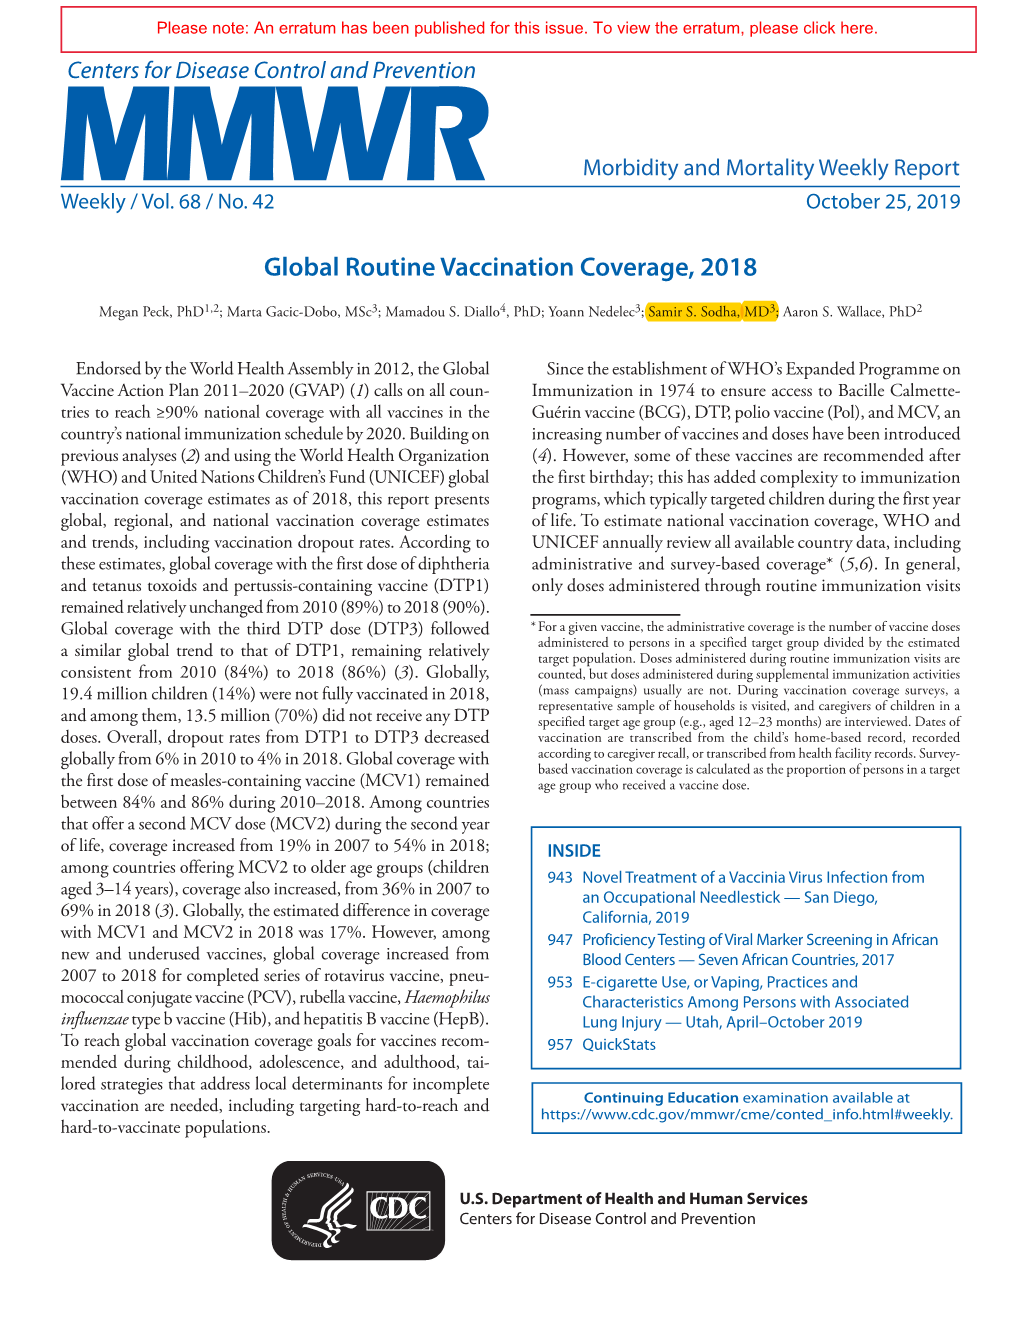 Morbidity and Mortality Weekly Report, Volume 68, Issue Number 42